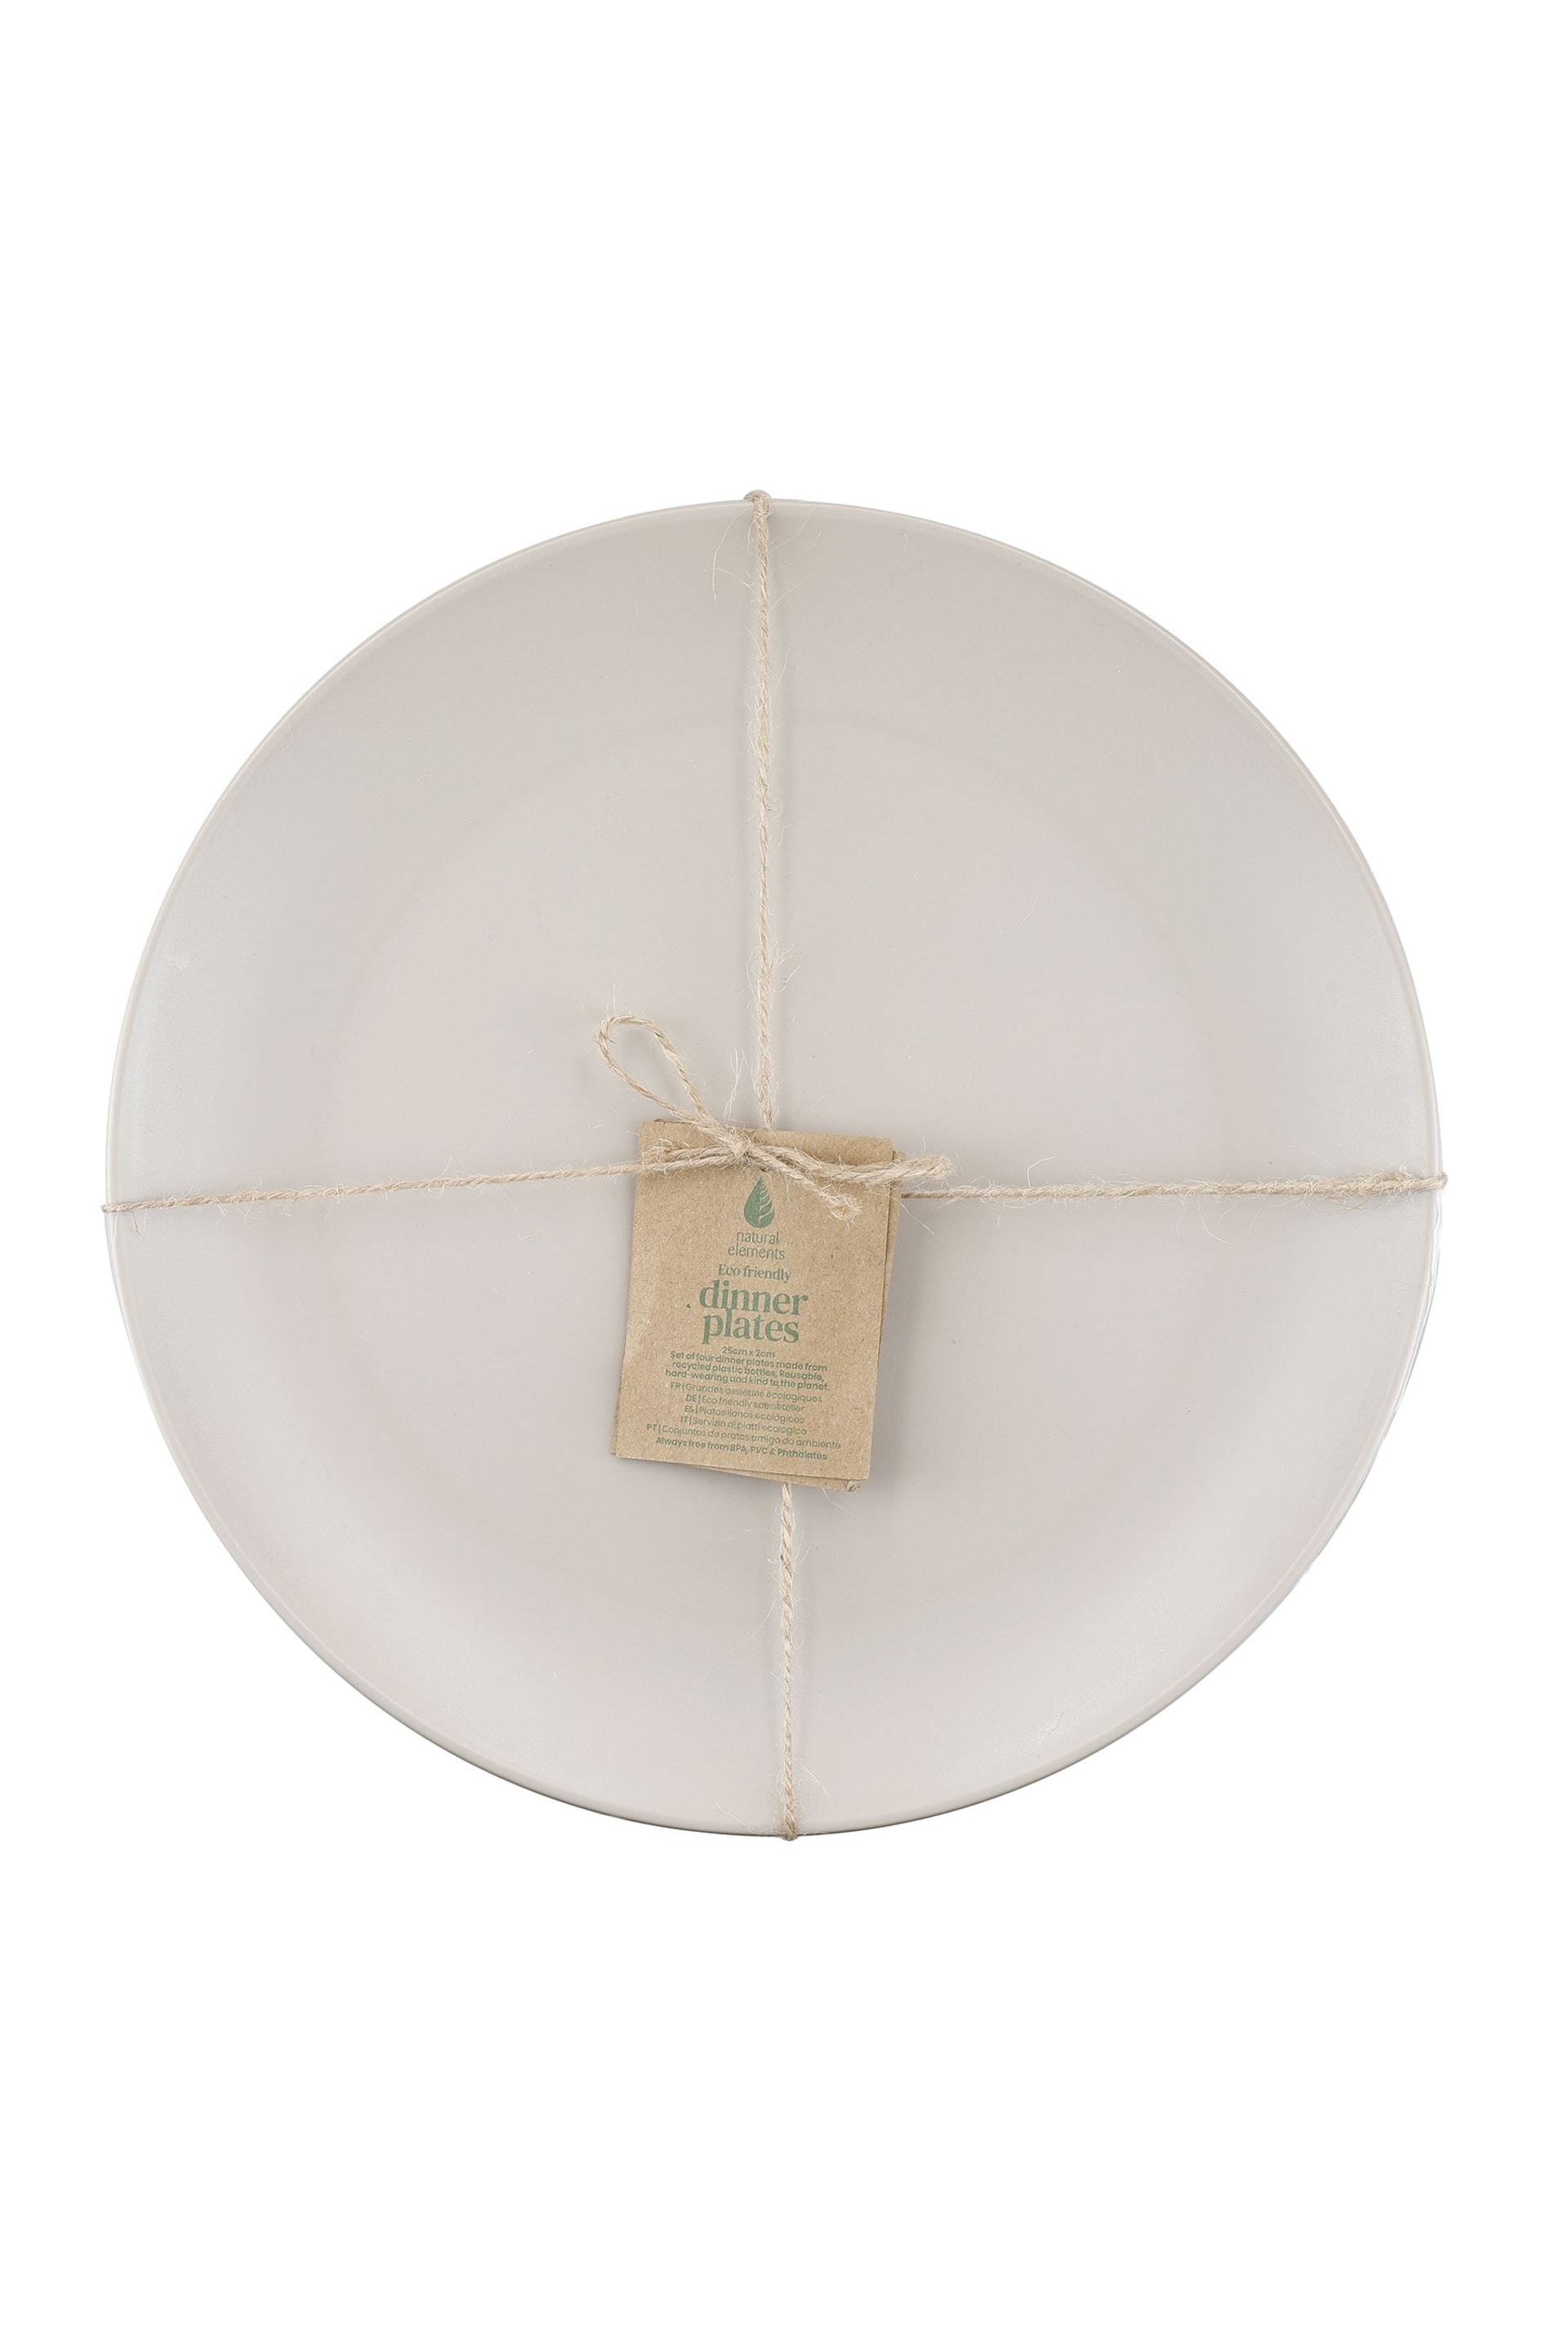 Natural Elements Set of 4 Brown Plastic Dinner Plates - Image 1 of 1